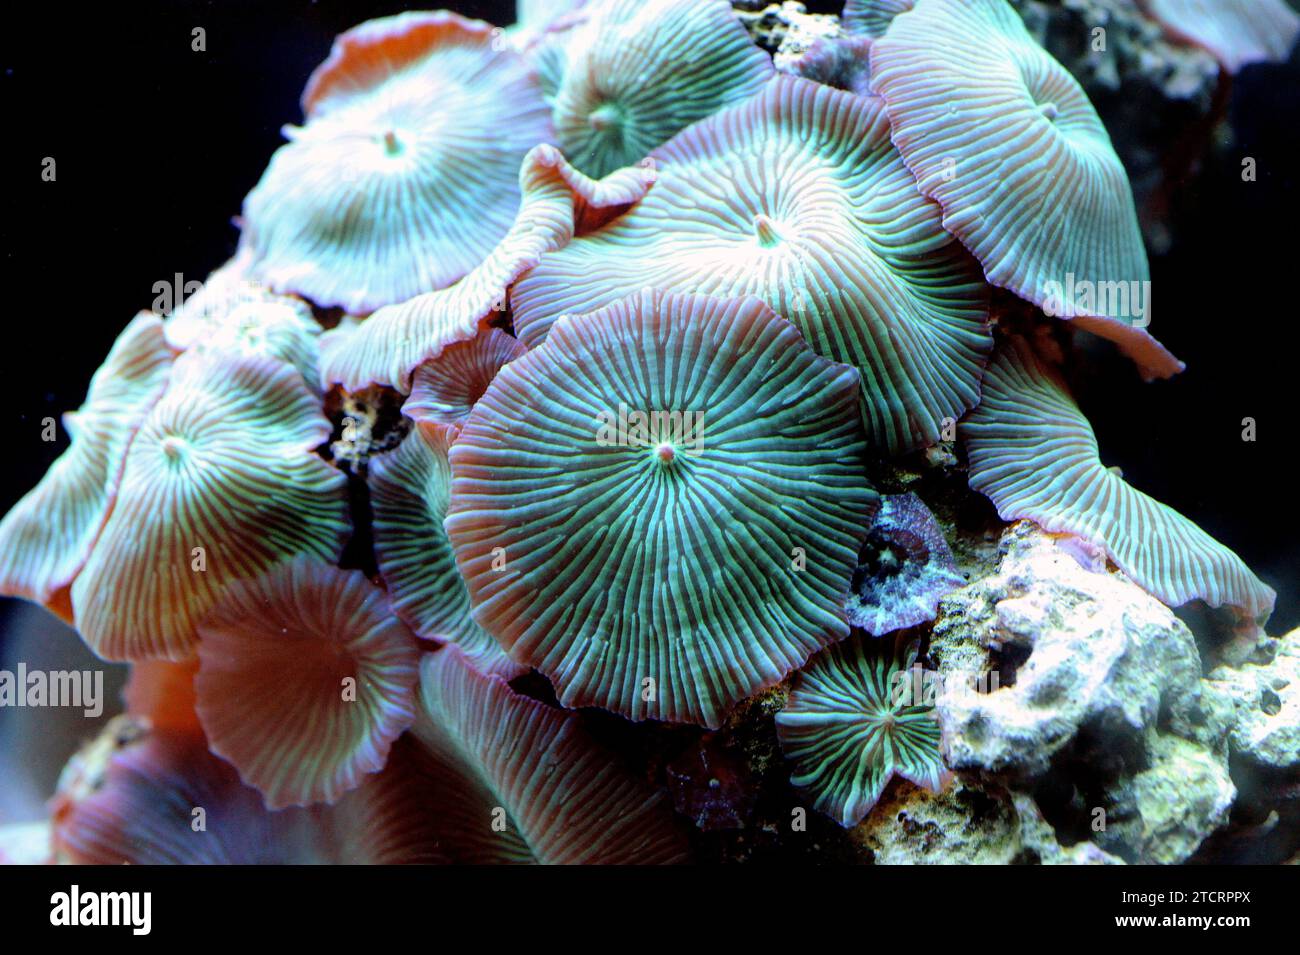 Disc anemone or mushroom anemone (Discosoma sp. or Actinodiscus sp.) are soft corals formed by individuals polyps that grow in colonies. Stock Photo